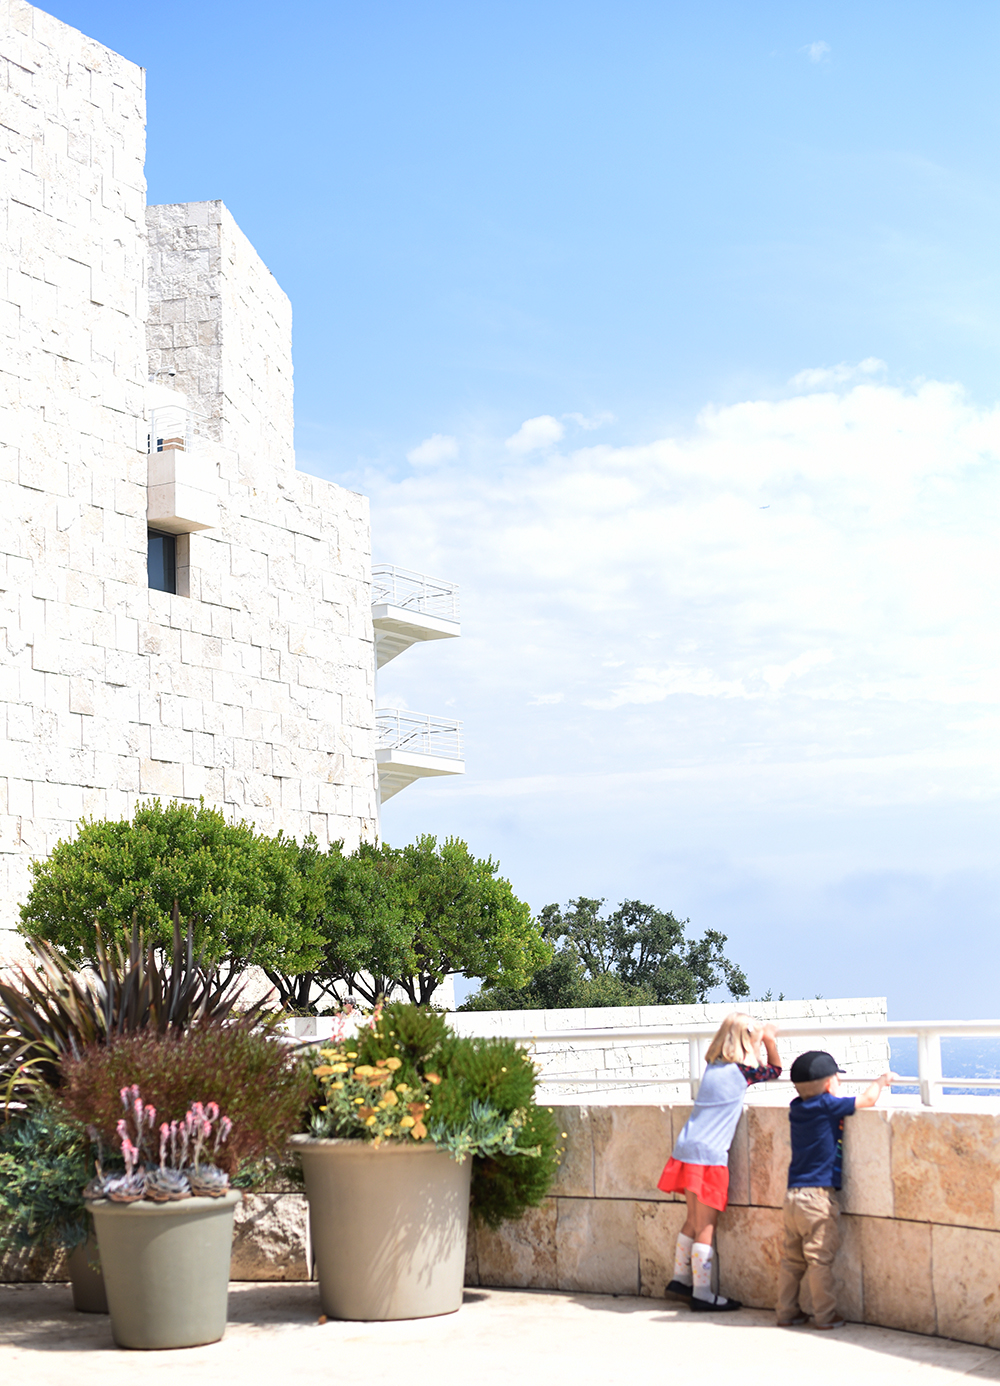 some highlights from our family trip to Los Angeles: the Getty Center